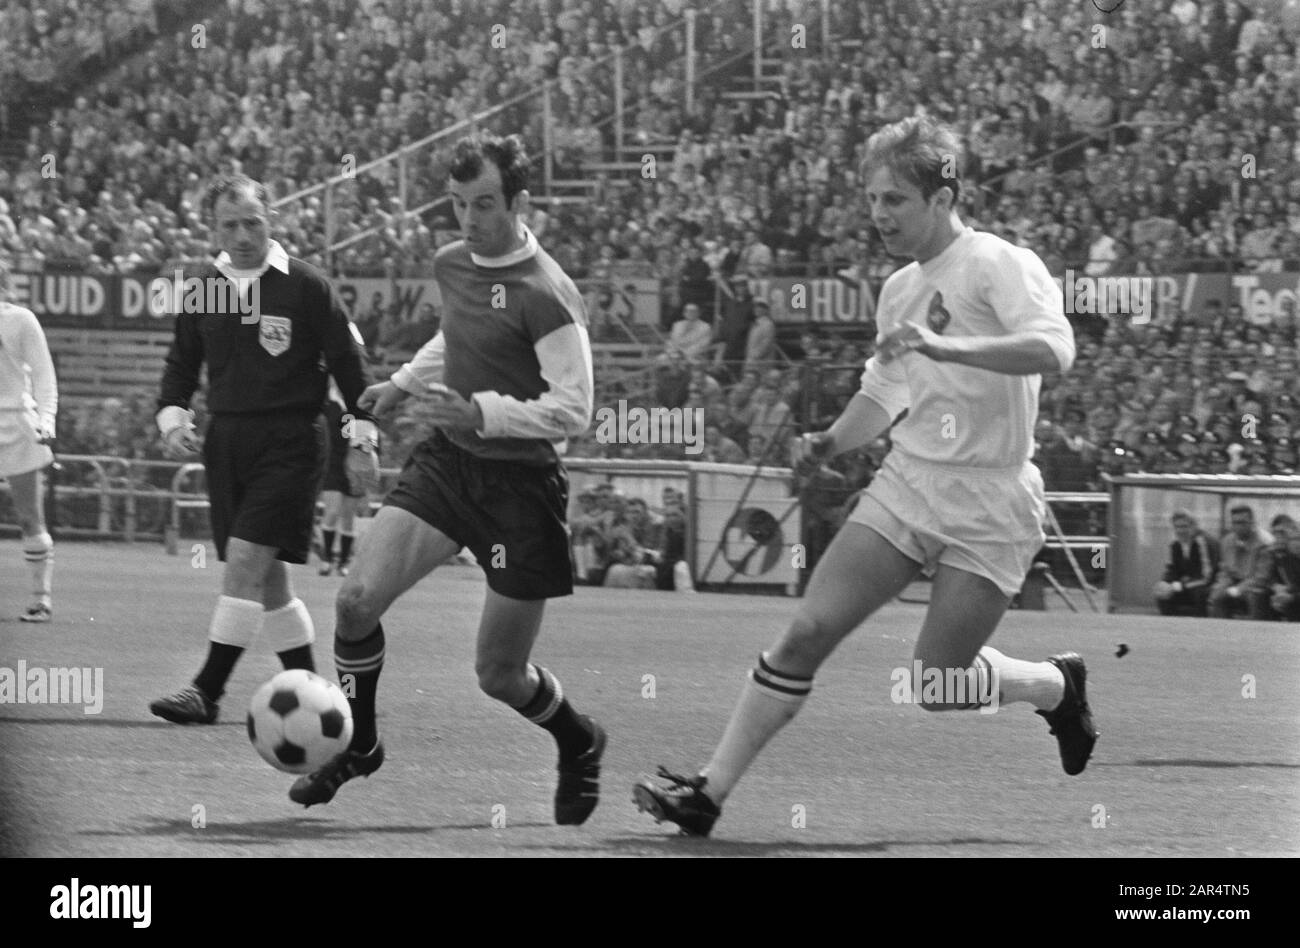 Feijenoord against Telstar 4-1 Coen Moulijn left, and right of Essen Date: May 18, 1969 Location: Rotterdam Keywords: sport, football Person name: Moulijn, Coen Institution name: Feyenoord Stock Photo